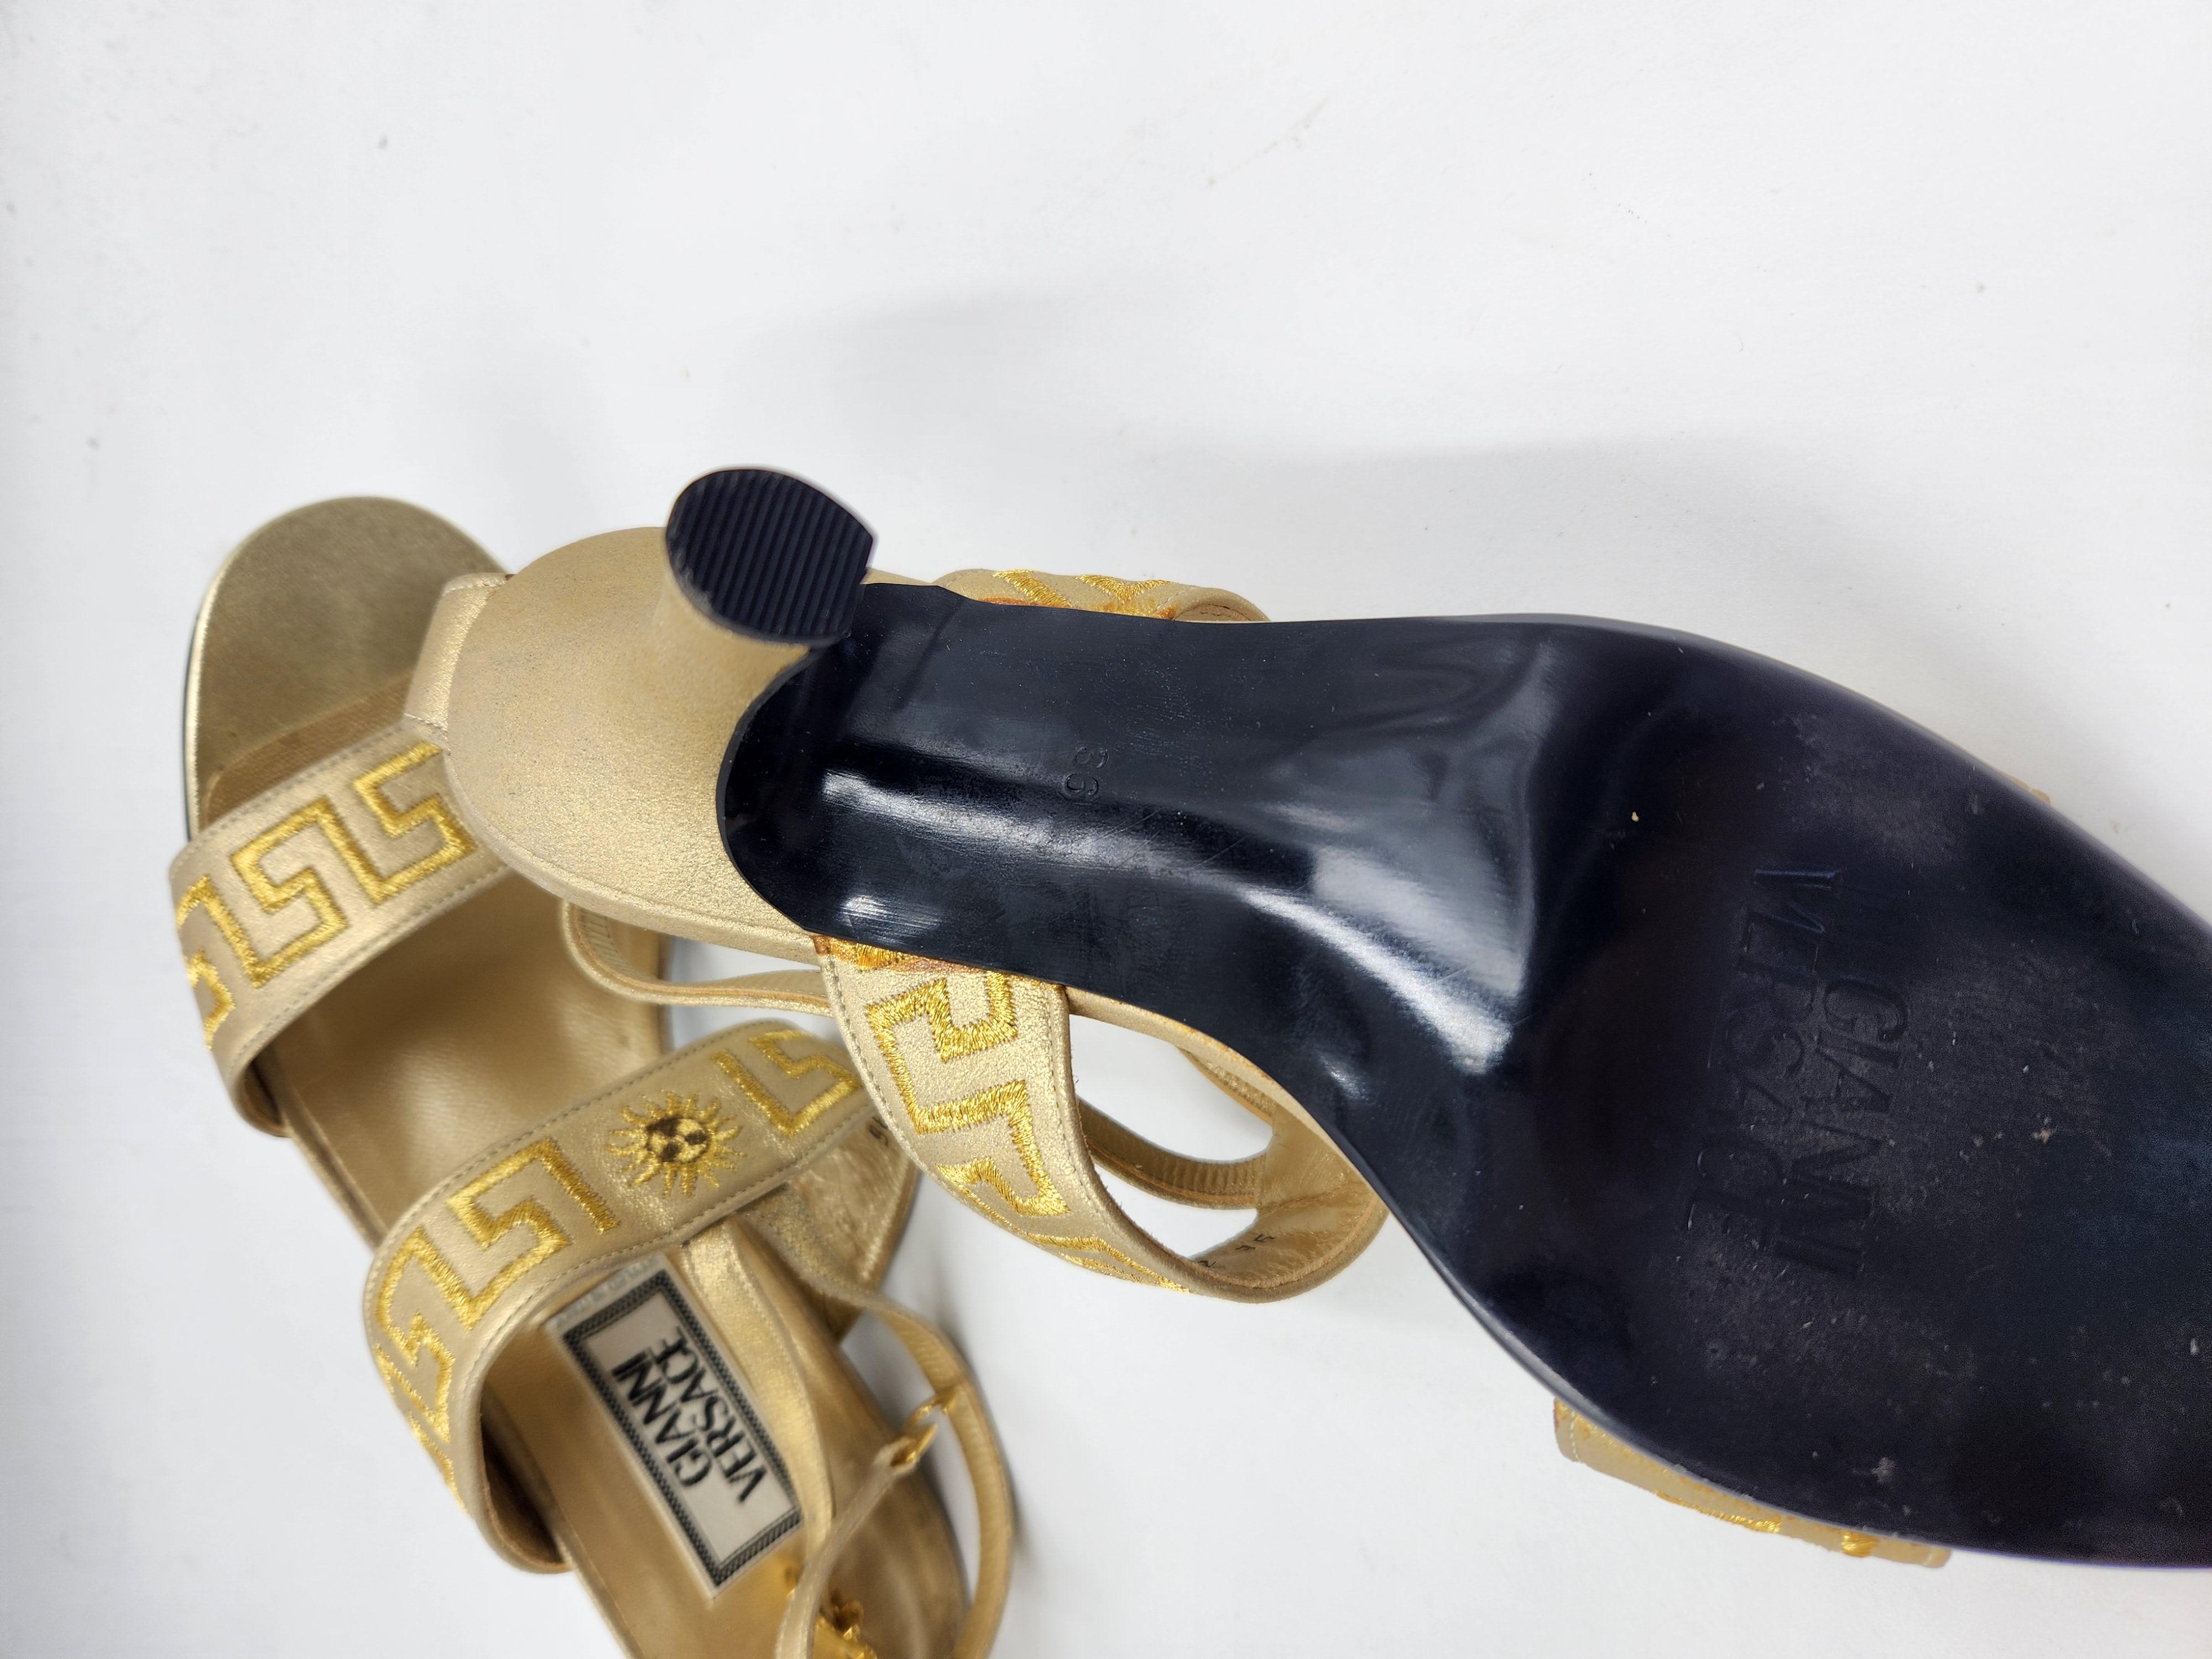 Vintage Gianni Versace gold greca heels in size 36. 
Feature
Material: Gold-tone Leather
Condition: Very good, light signs of wear as pictured.
Colour: Gold
Size: IT 36
Period: 1990-
Place of Origin: Italy